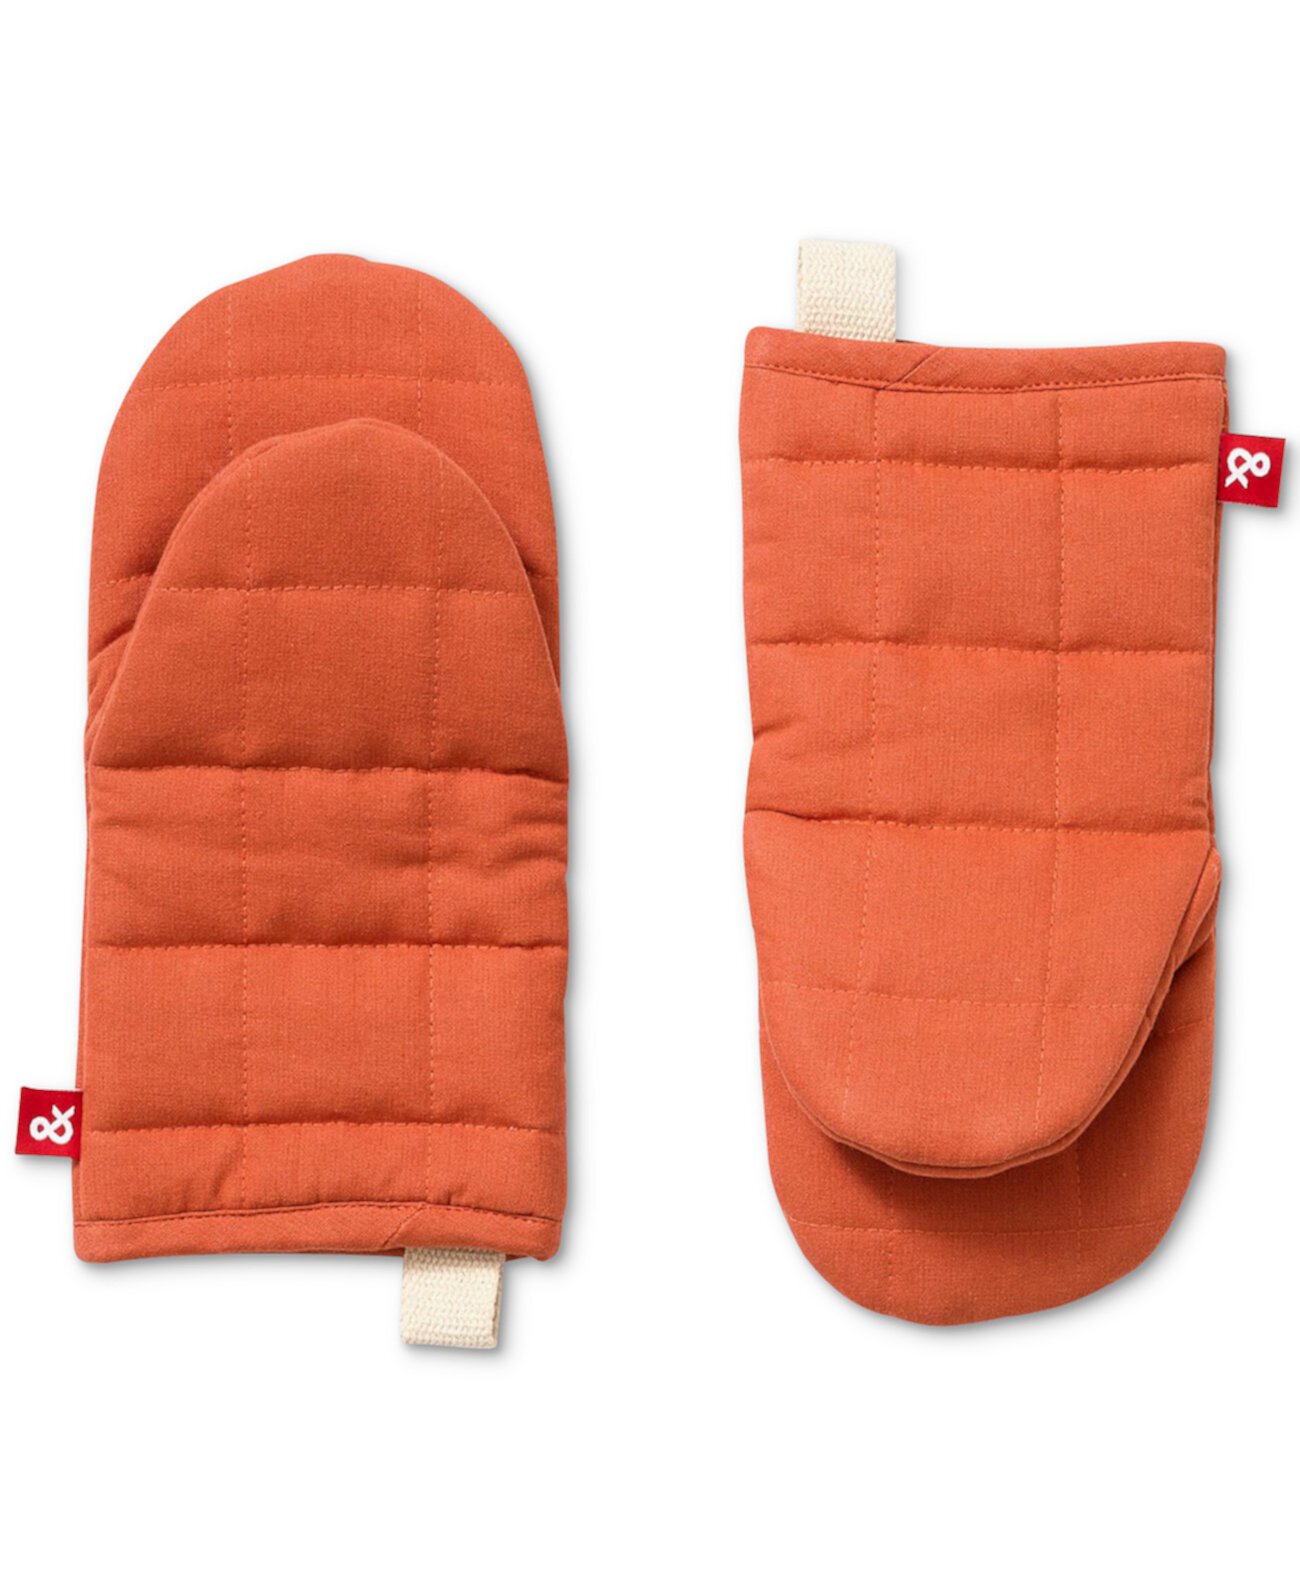 Quilted Solid-Color Oven Mitts, Set of 2 Hedley & Bennett